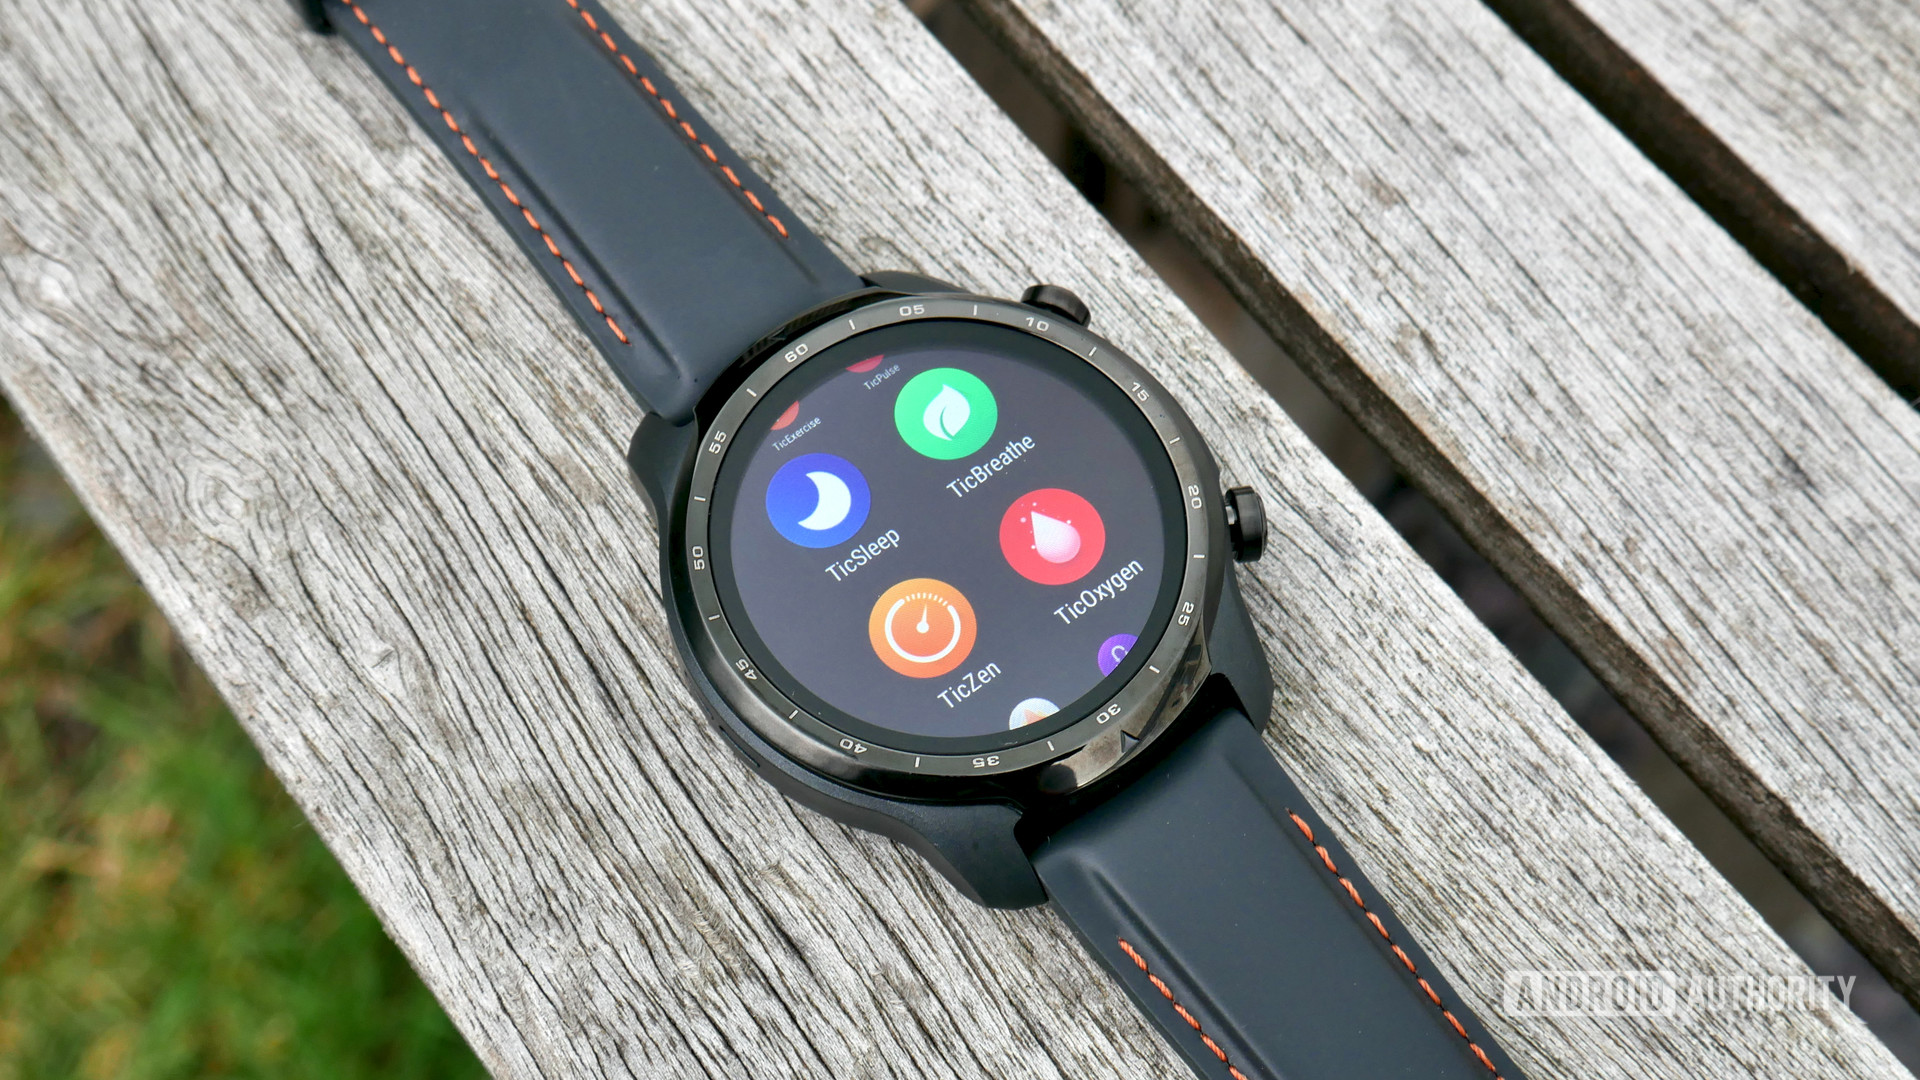 TicWatch Pro 3 review: Resetting the bar for Wear OS smartwatches